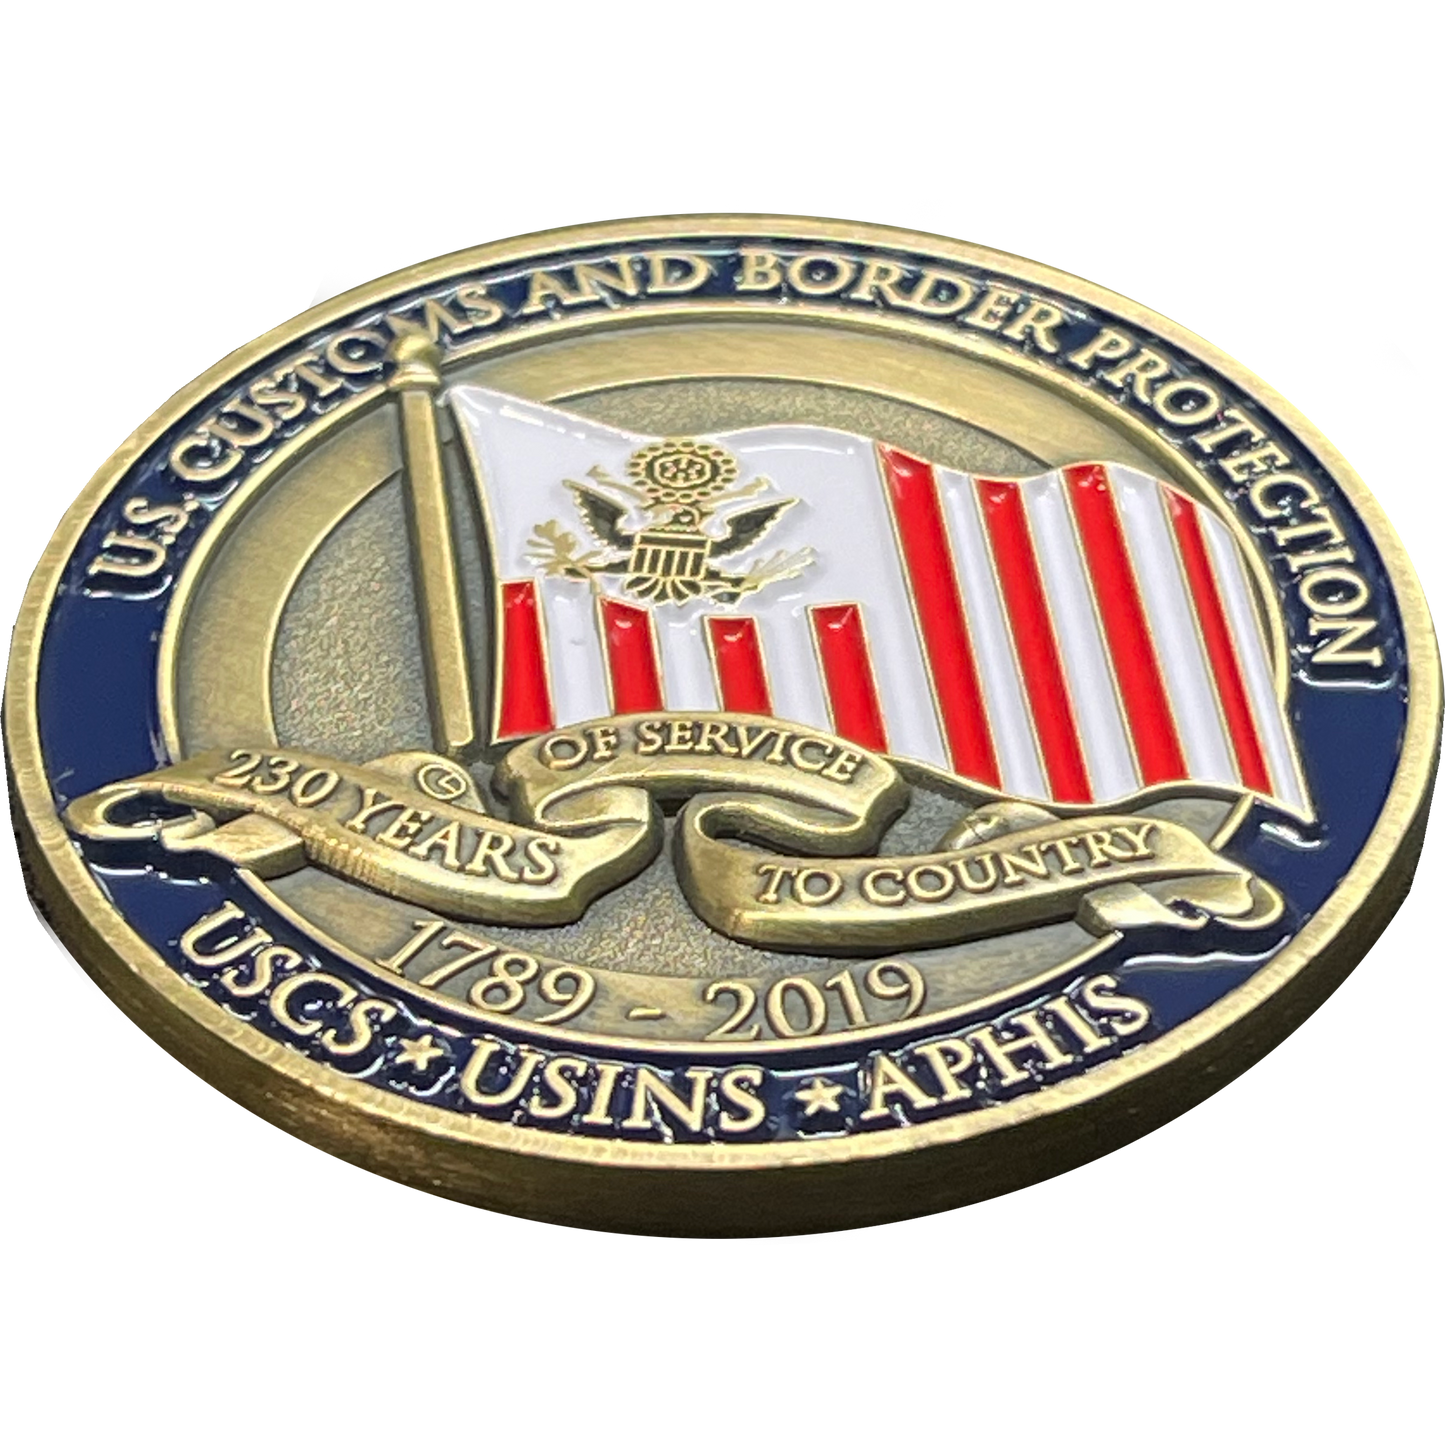 BL13-020 CBP Customs Service Immigration INS APHIS Agriculture Specialist Anniversary Challenge Coin